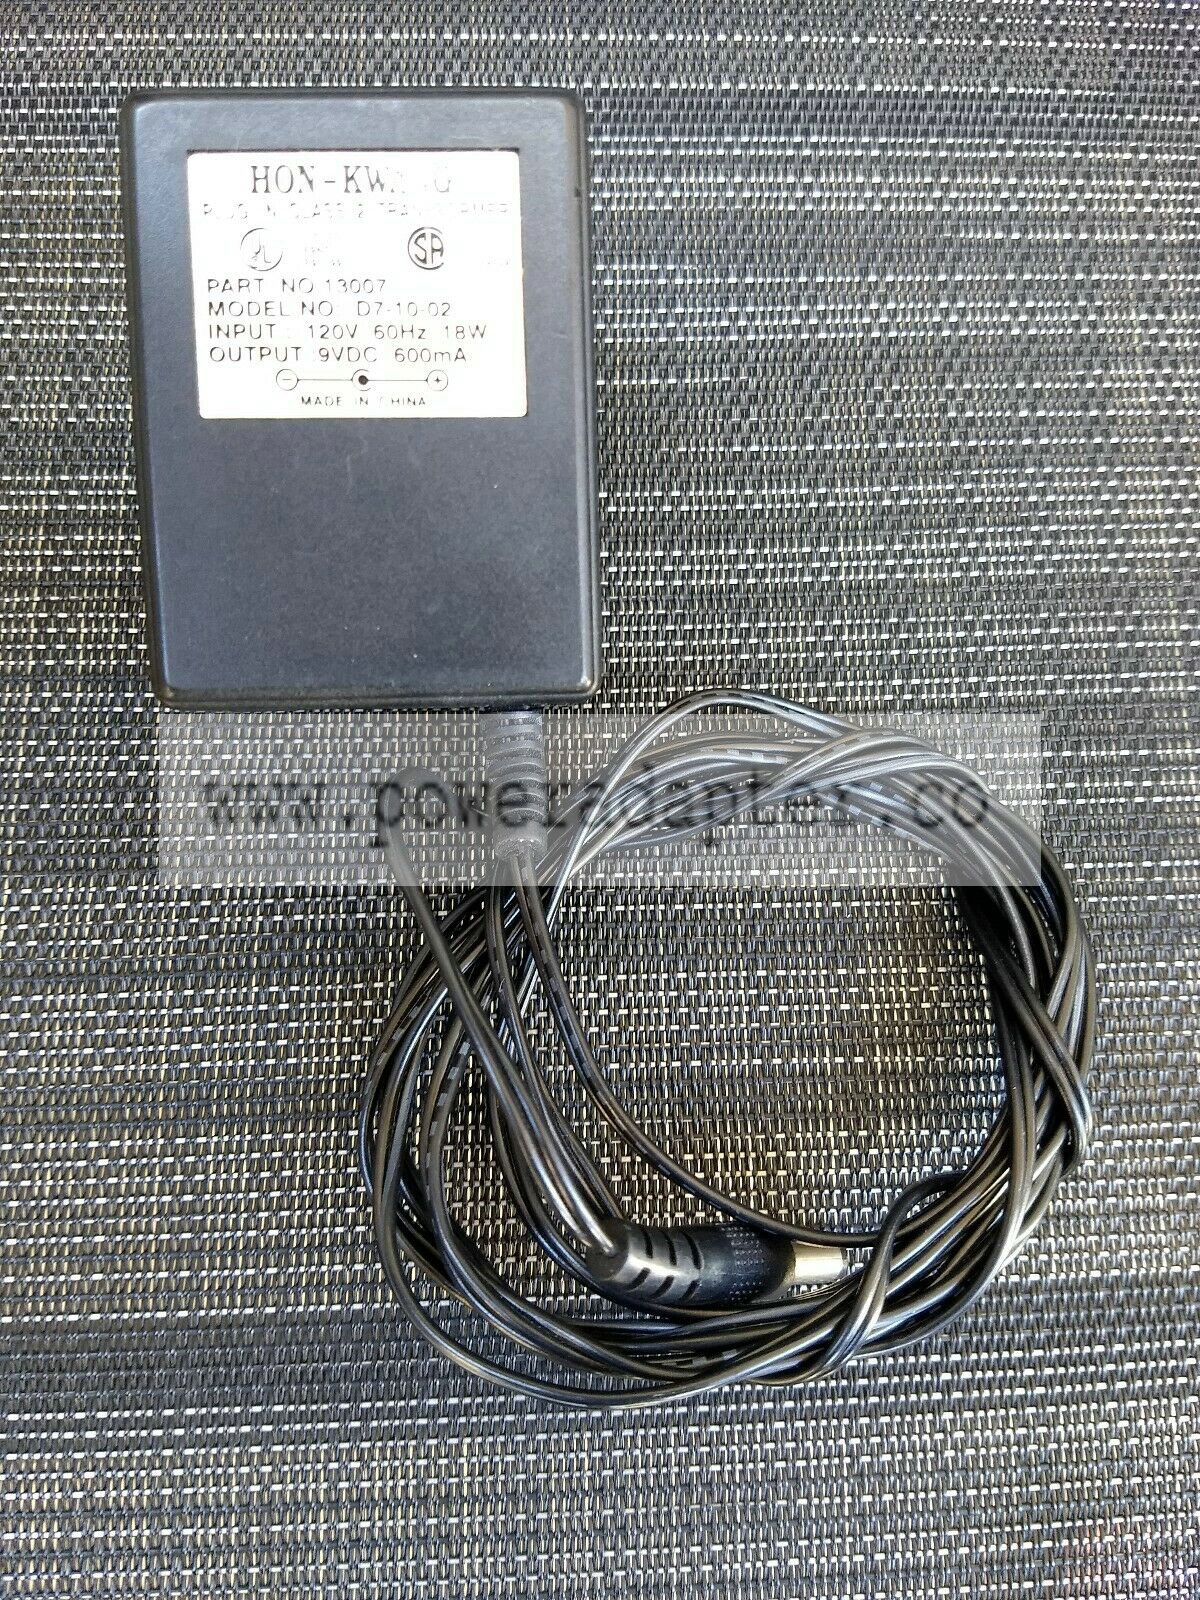 Hon Kwang Power Supply AC Adapter 13007 Transformer D7-10-02 - Output 9VDC 600mA Product Type: Transformer Type: Wall - Click Image to Close